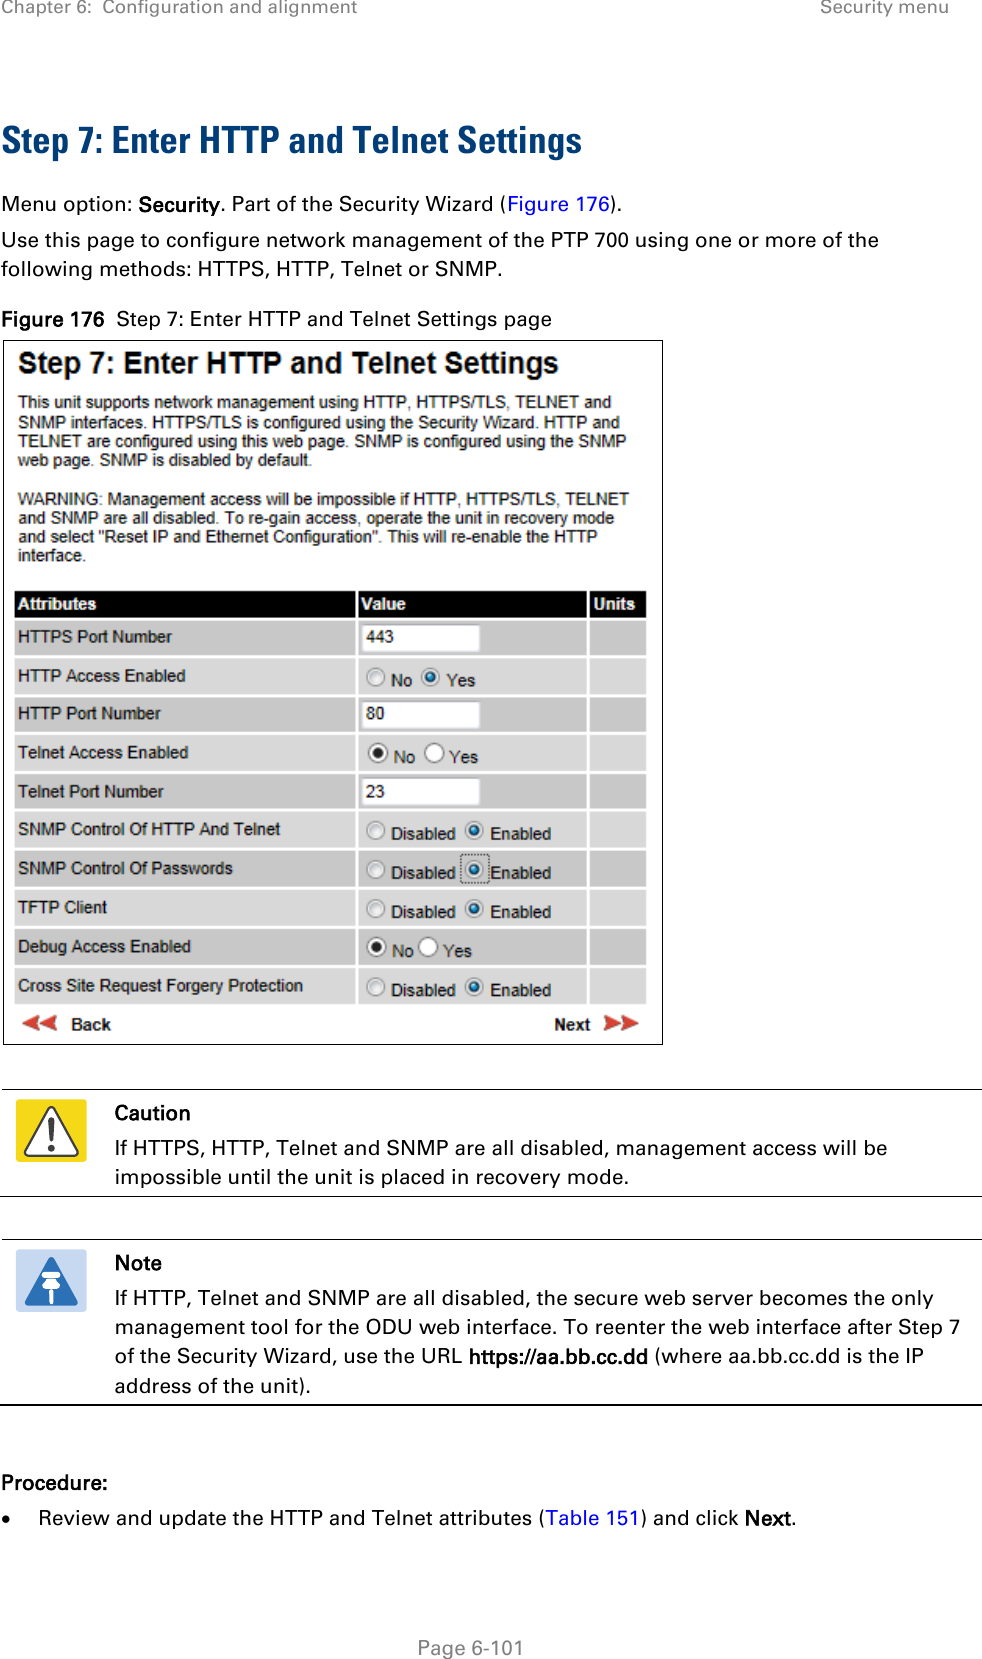 Chapter 6:  Configuration and alignment Security menu  Step 7: Enter HTTP and Telnet Settings Menu option: Security. Part of the Security Wizard (Figure 176). Use this page to configure network management of the PTP 700 using one or more of the following methods: HTTPS, HTTP, Telnet or SNMP. Figure 176  Step 7: Enter HTTP and Telnet Settings page    Caution If HTTPS, HTTP, Telnet and SNMP are all disabled, management access will be impossible until the unit is placed in recovery mode.   Note If HTTP, Telnet and SNMP are all disabled, the secure web server becomes the only management tool for the ODU web interface. To reenter the web interface after Step 7 of the Security Wizard, use the URL https://aa.bb.cc.dd (where aa.bb.cc.dd is the IP address of the unit).  Procedure: • Review and update the HTTP and Telnet attributes (Table 151) and click Next.  Page 6-101 